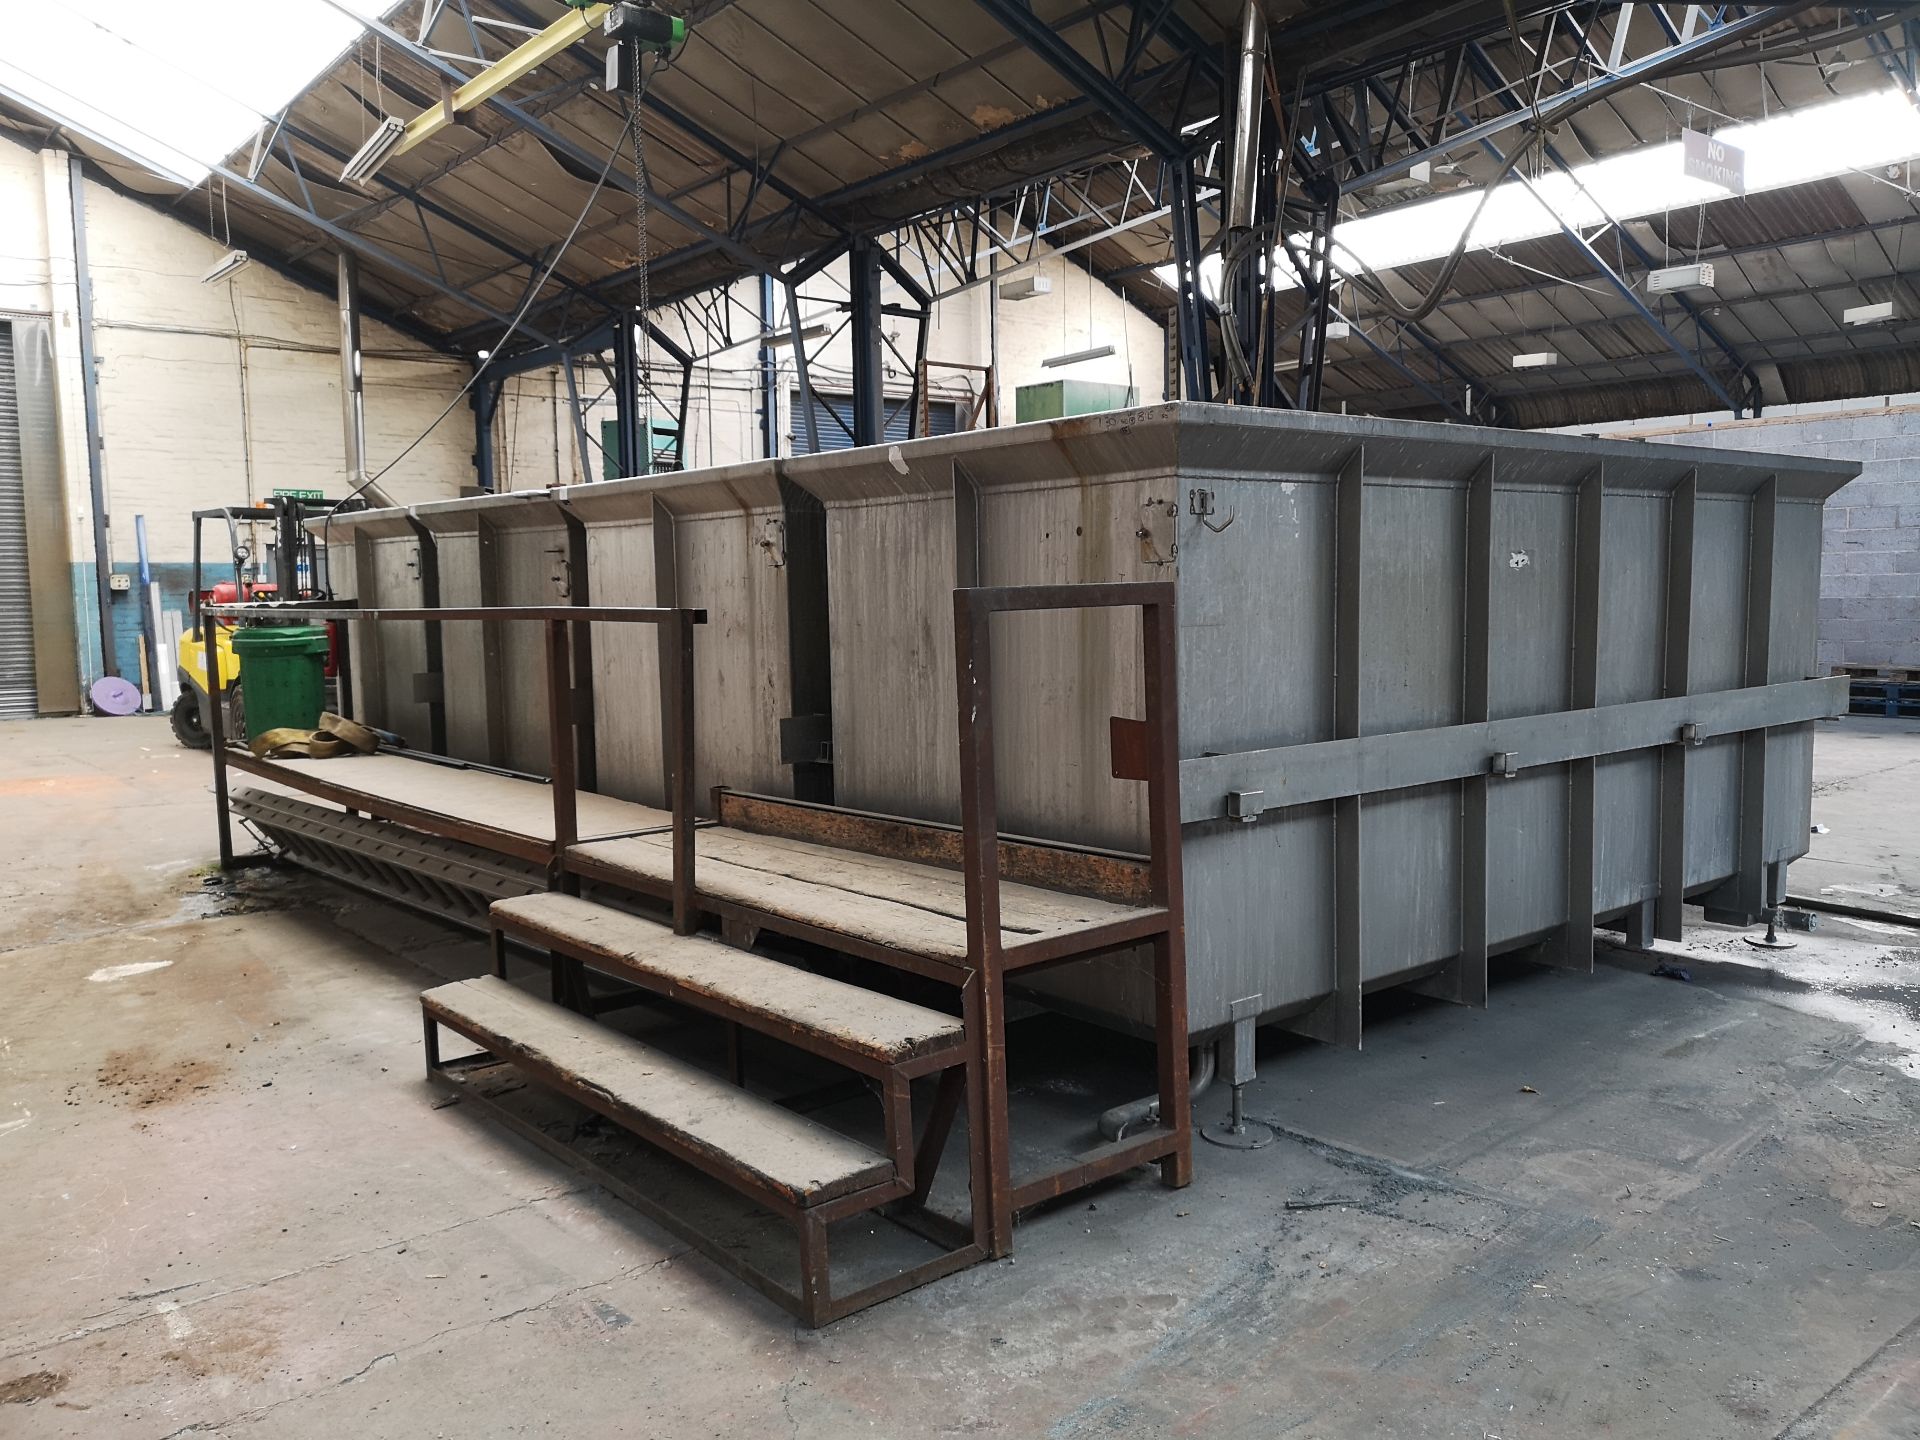 4 Galvanised Treatment Tanks with Platform and Stairs including 2 Outlets for Waste *PLUS VAT*